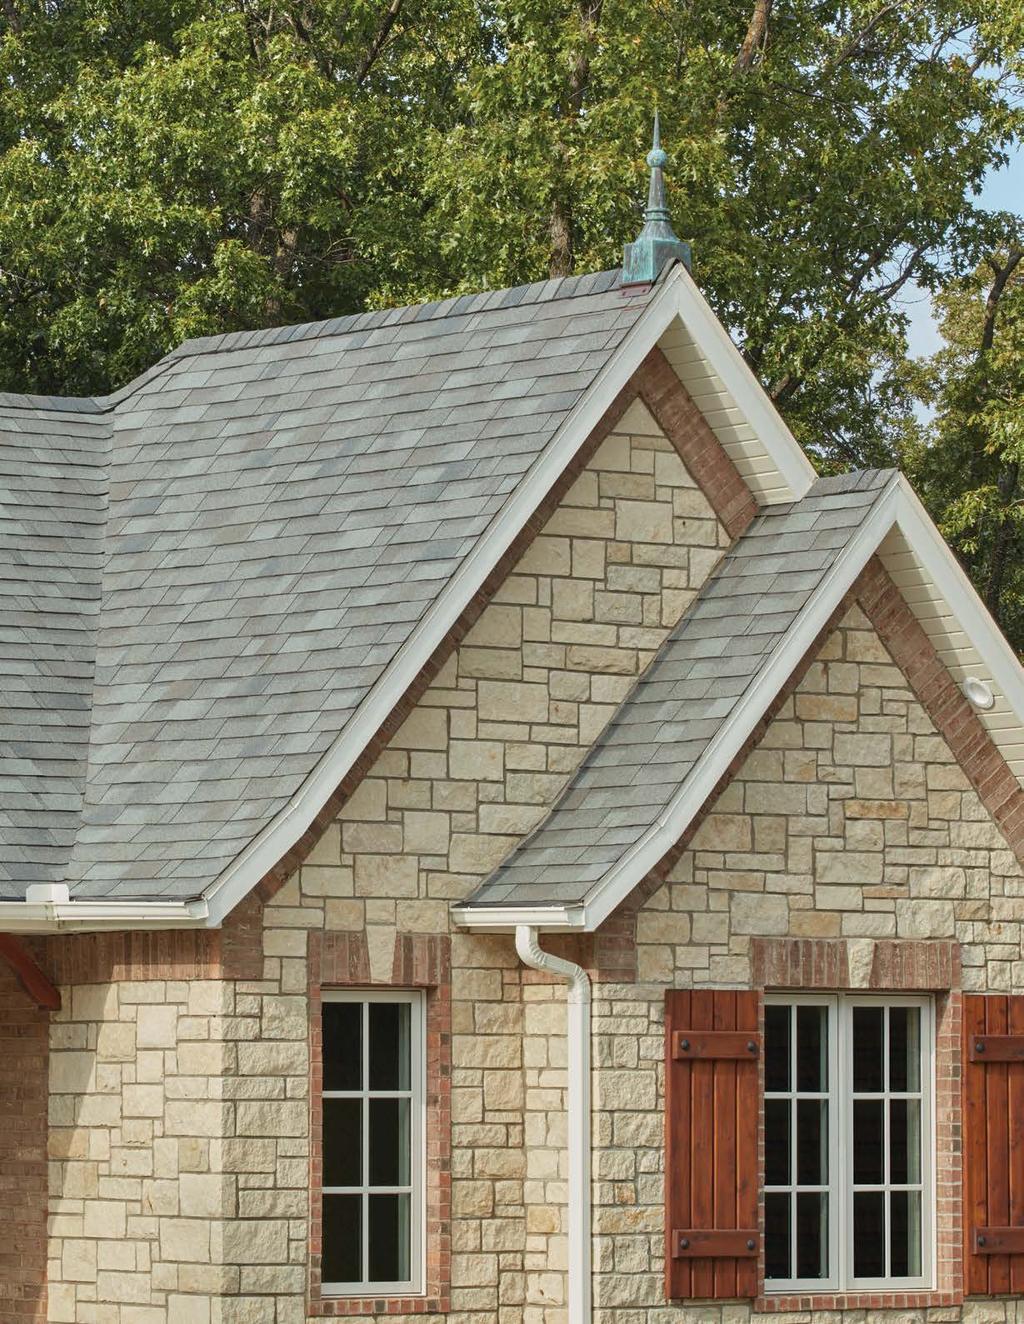 HERITAGE WOODGATE Antique Wood PRIOR TO MAKING YOUR FINAL COLOR SELECTION, TAMKO RECOMMENDS VIEWING AN ACTUAL ROOF INSTALLATION OF THE SAME SHINGLE COLOR AND MANUFACTURING PLANT YOU ARE CONSIDERING